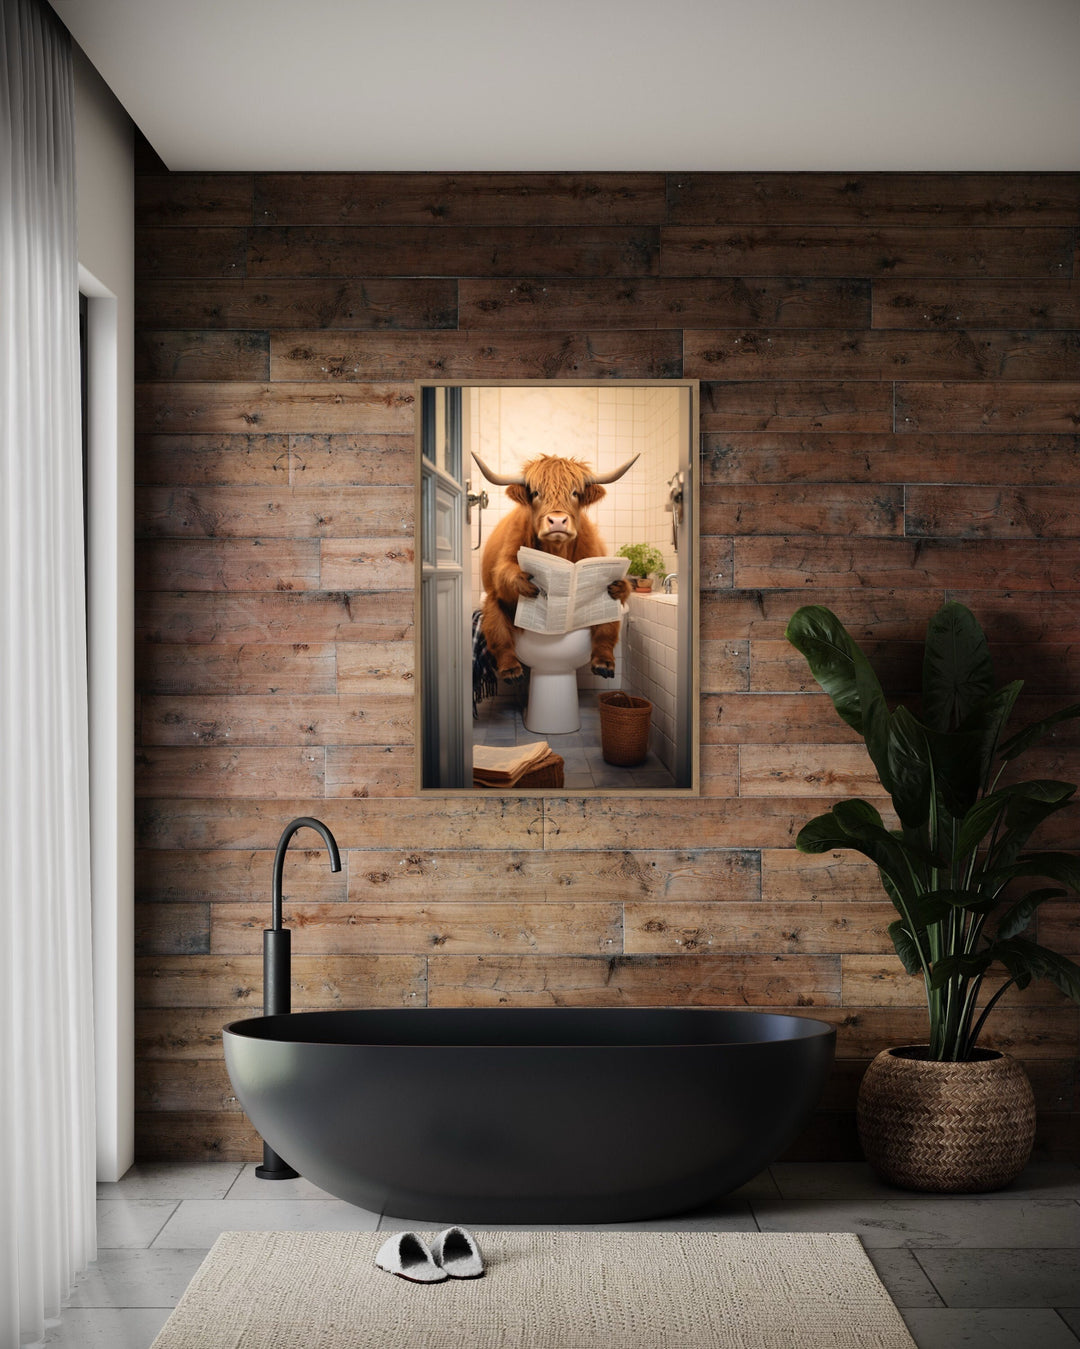 Highland Cow On The Toilet Reading Newspaper Wall Art in rustic bathroom